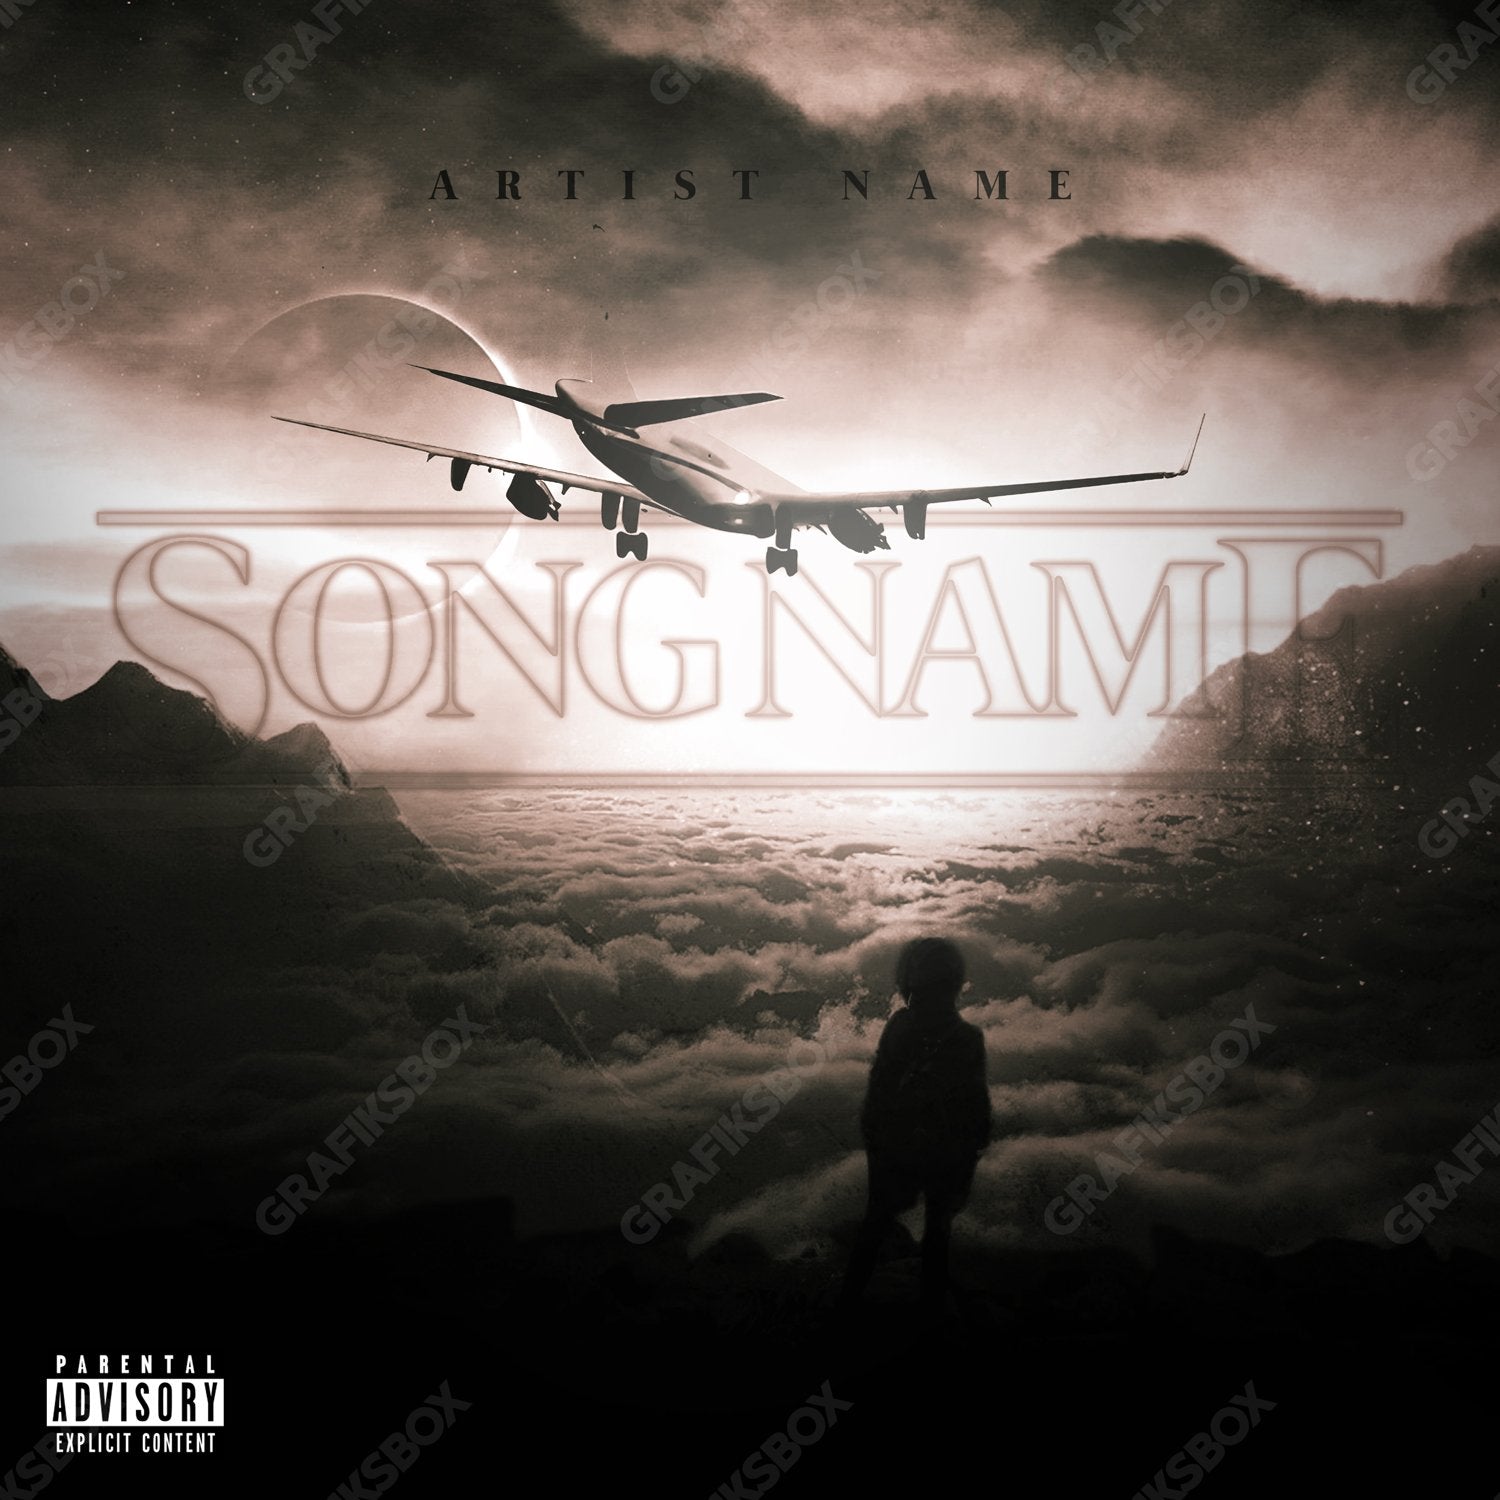 High Airport premade cover art